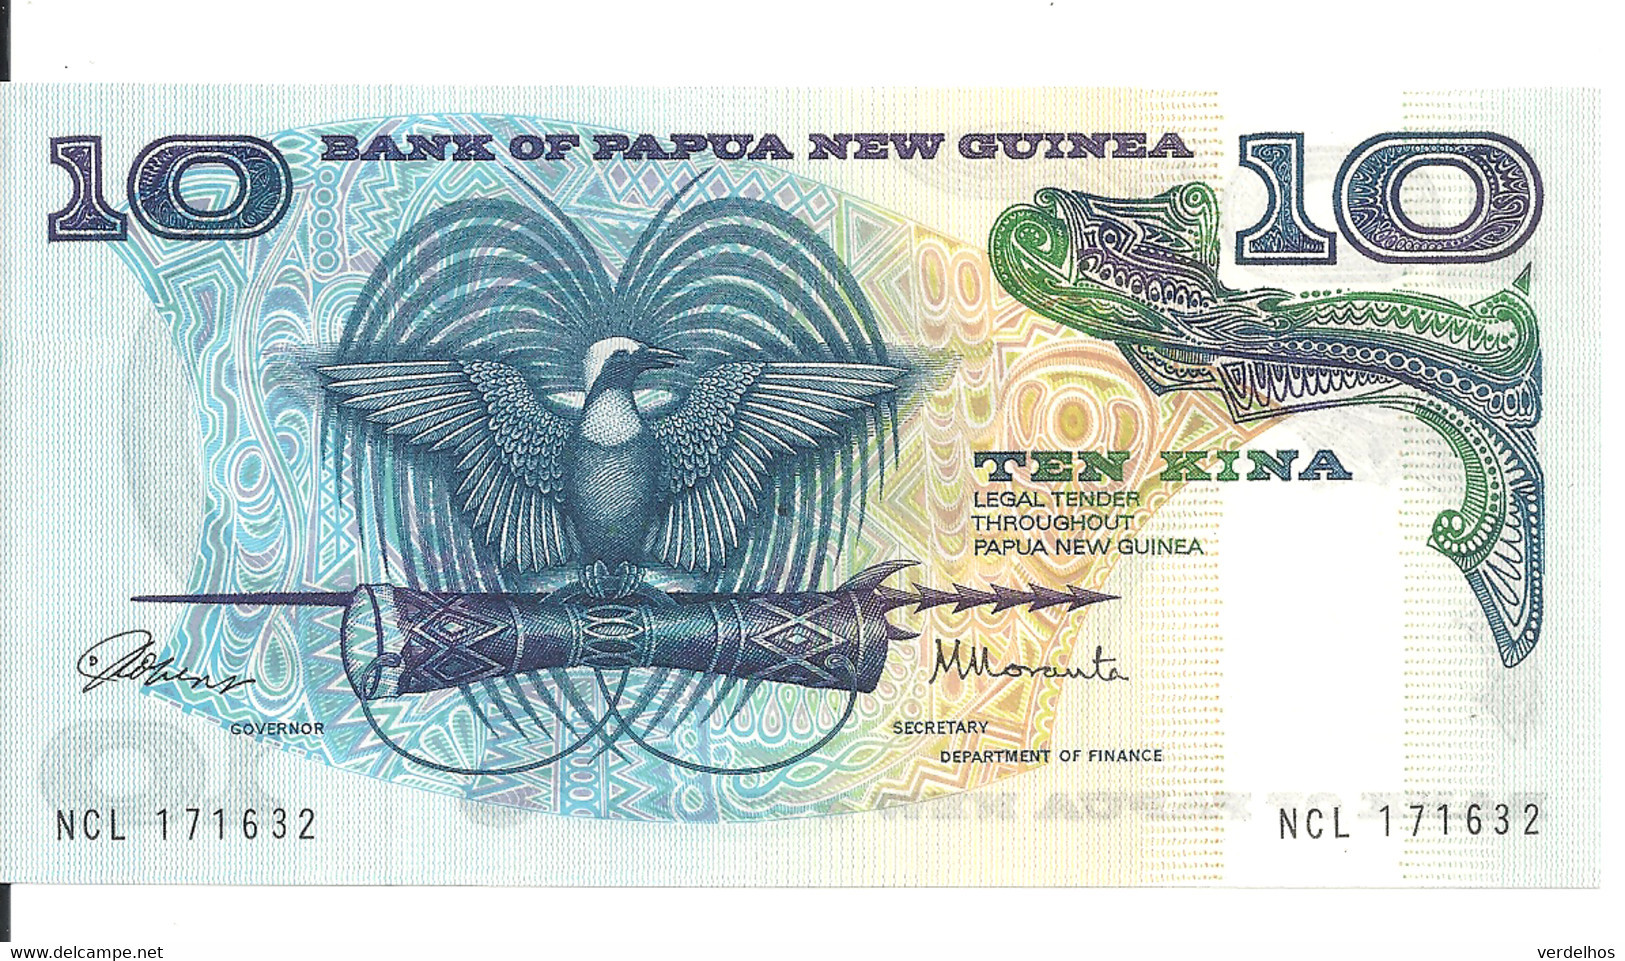 PAPOUASIE NEW GUINEA 10 KINA ND1985 UNC P 7 - Papua New Guinea